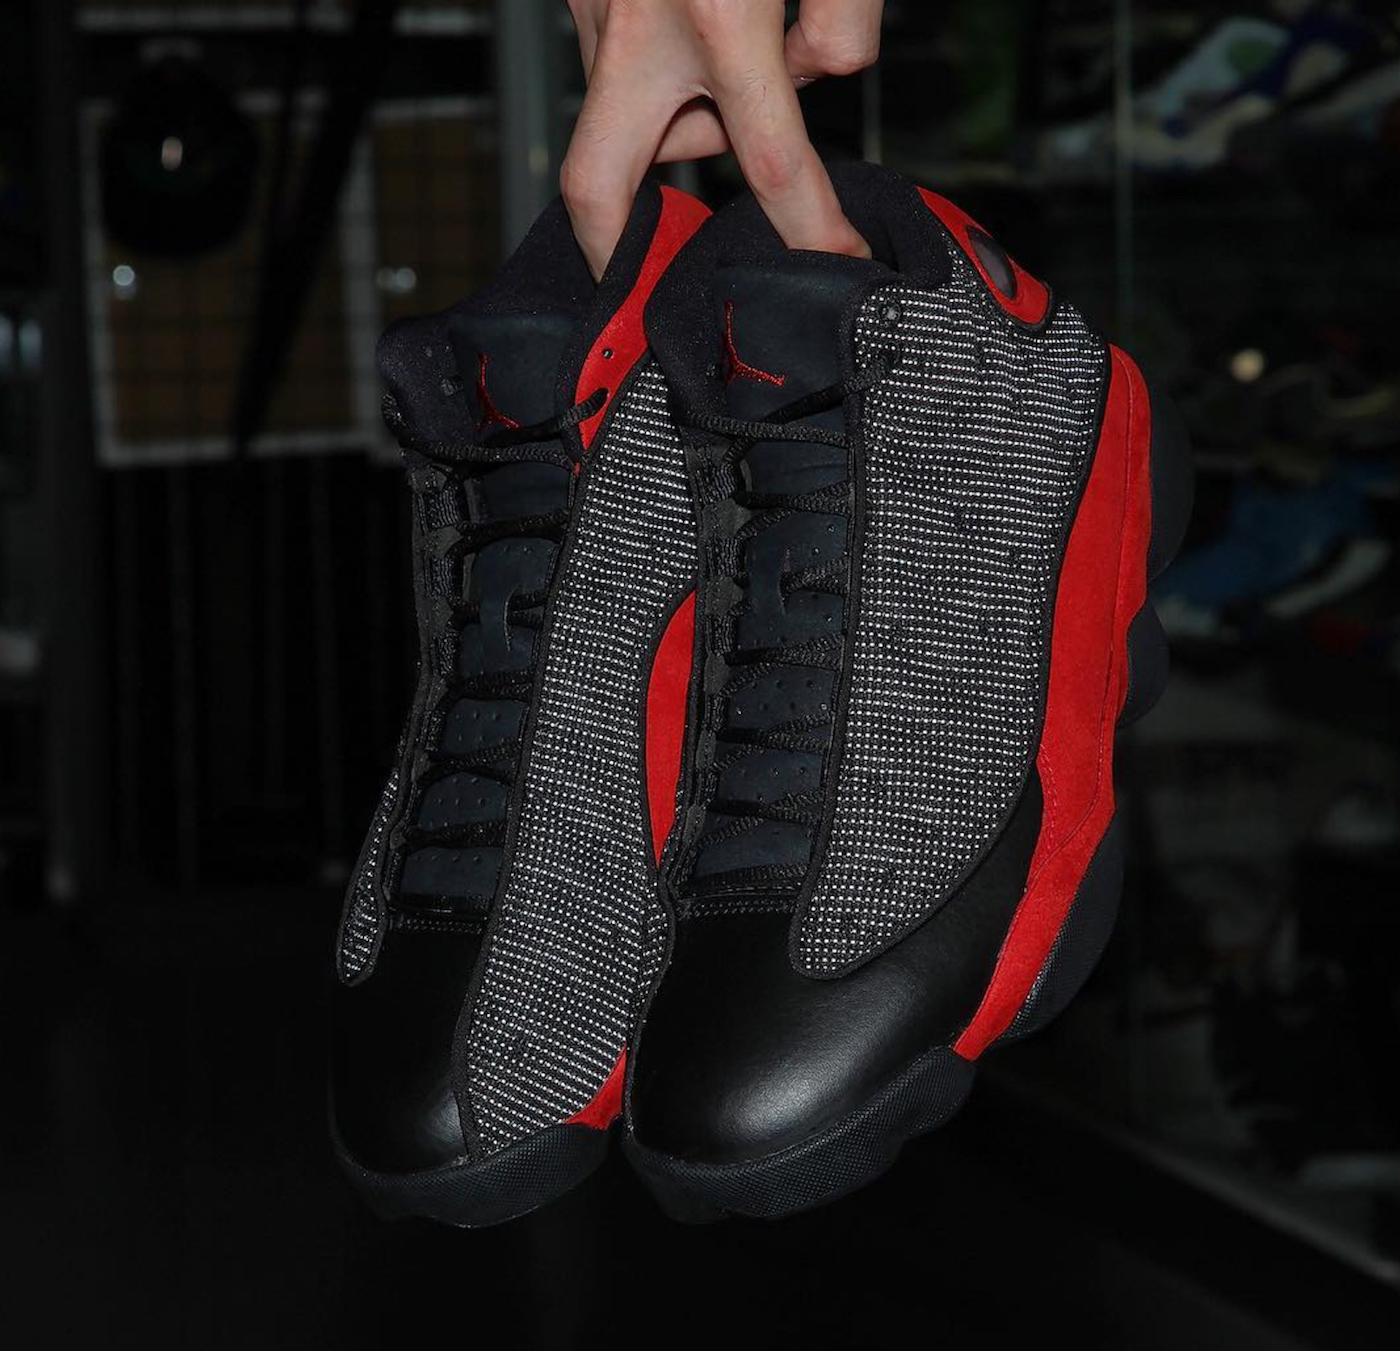 Beauty Shots of the Air 13 Retro 'Black/Red' WearTesters